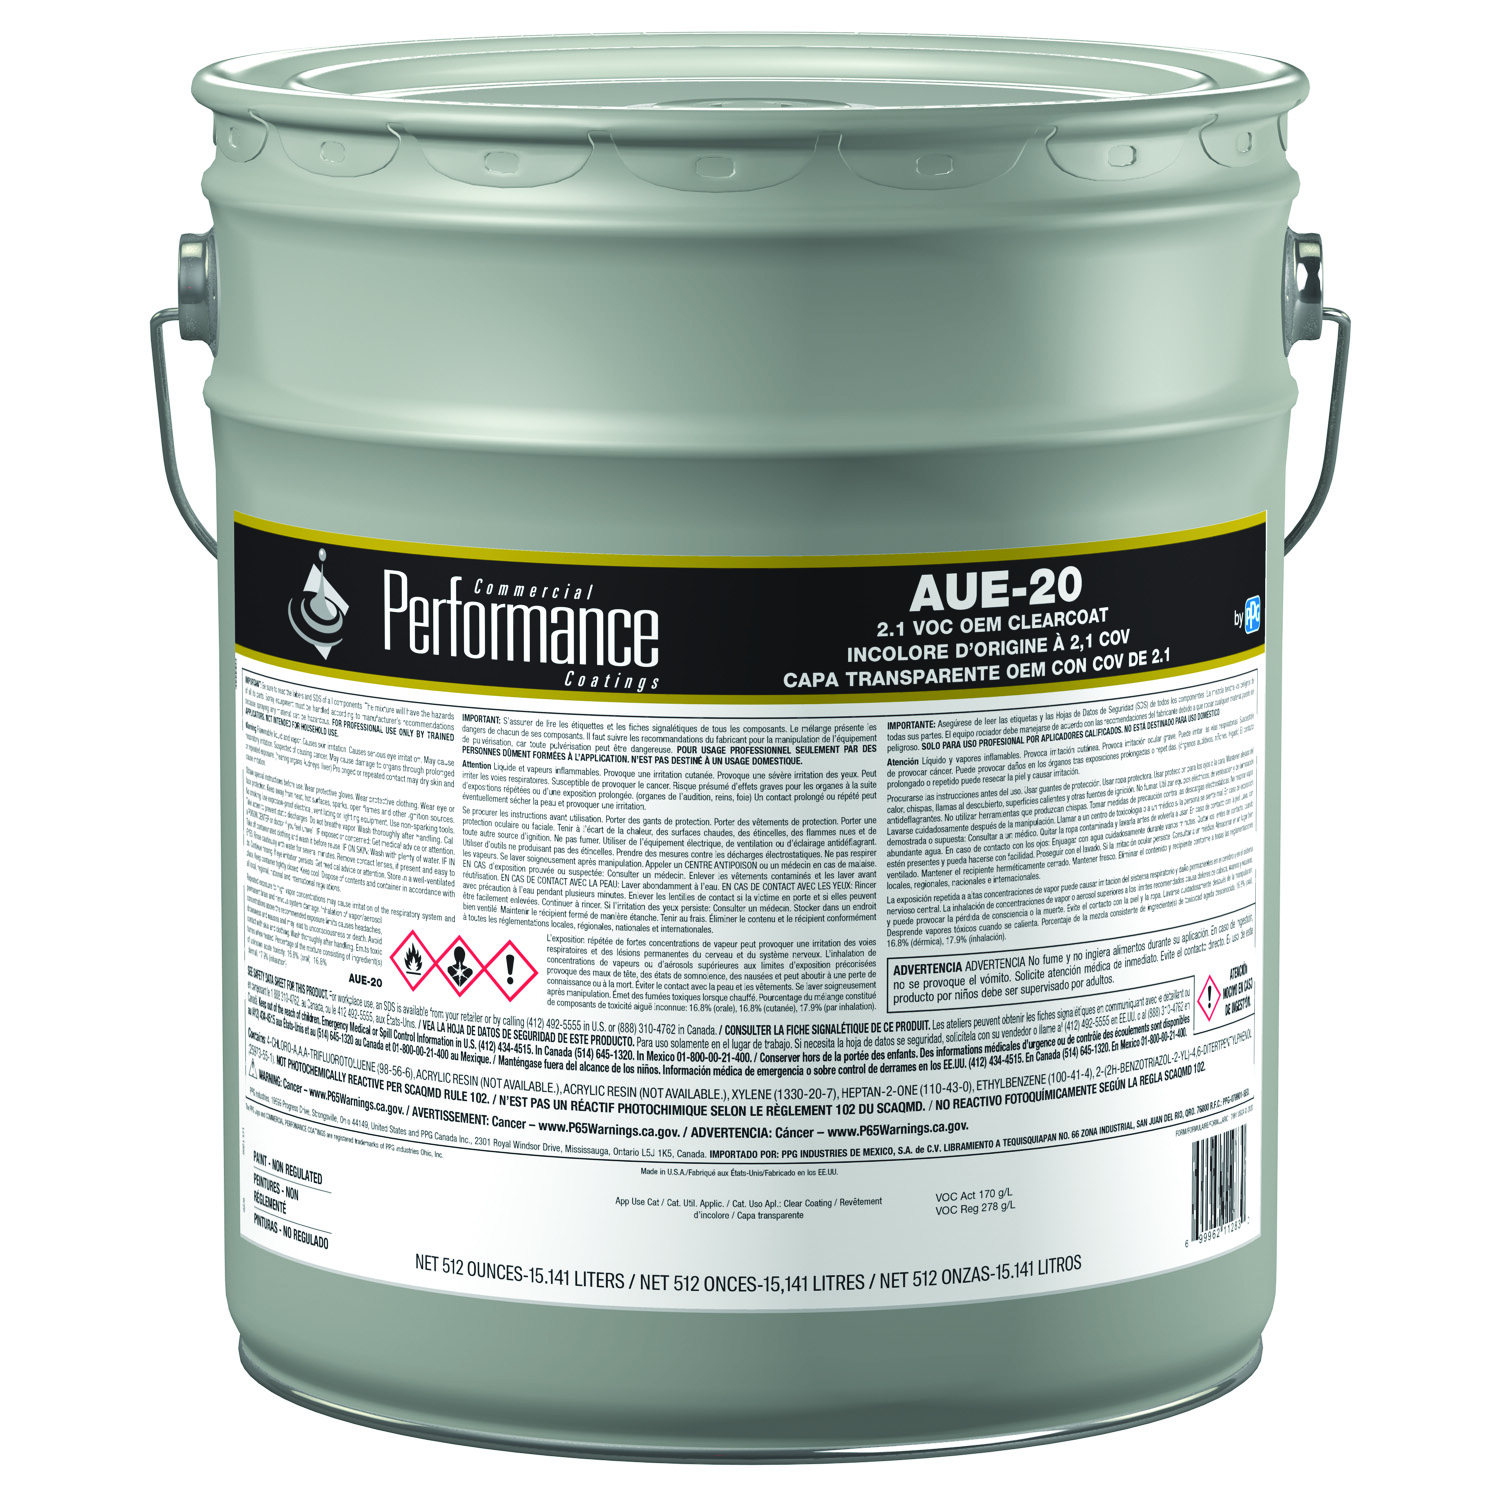 PPG Launches AUE-20 OEM 2.1 VOC Clearcoat for Heavy-duty Applications